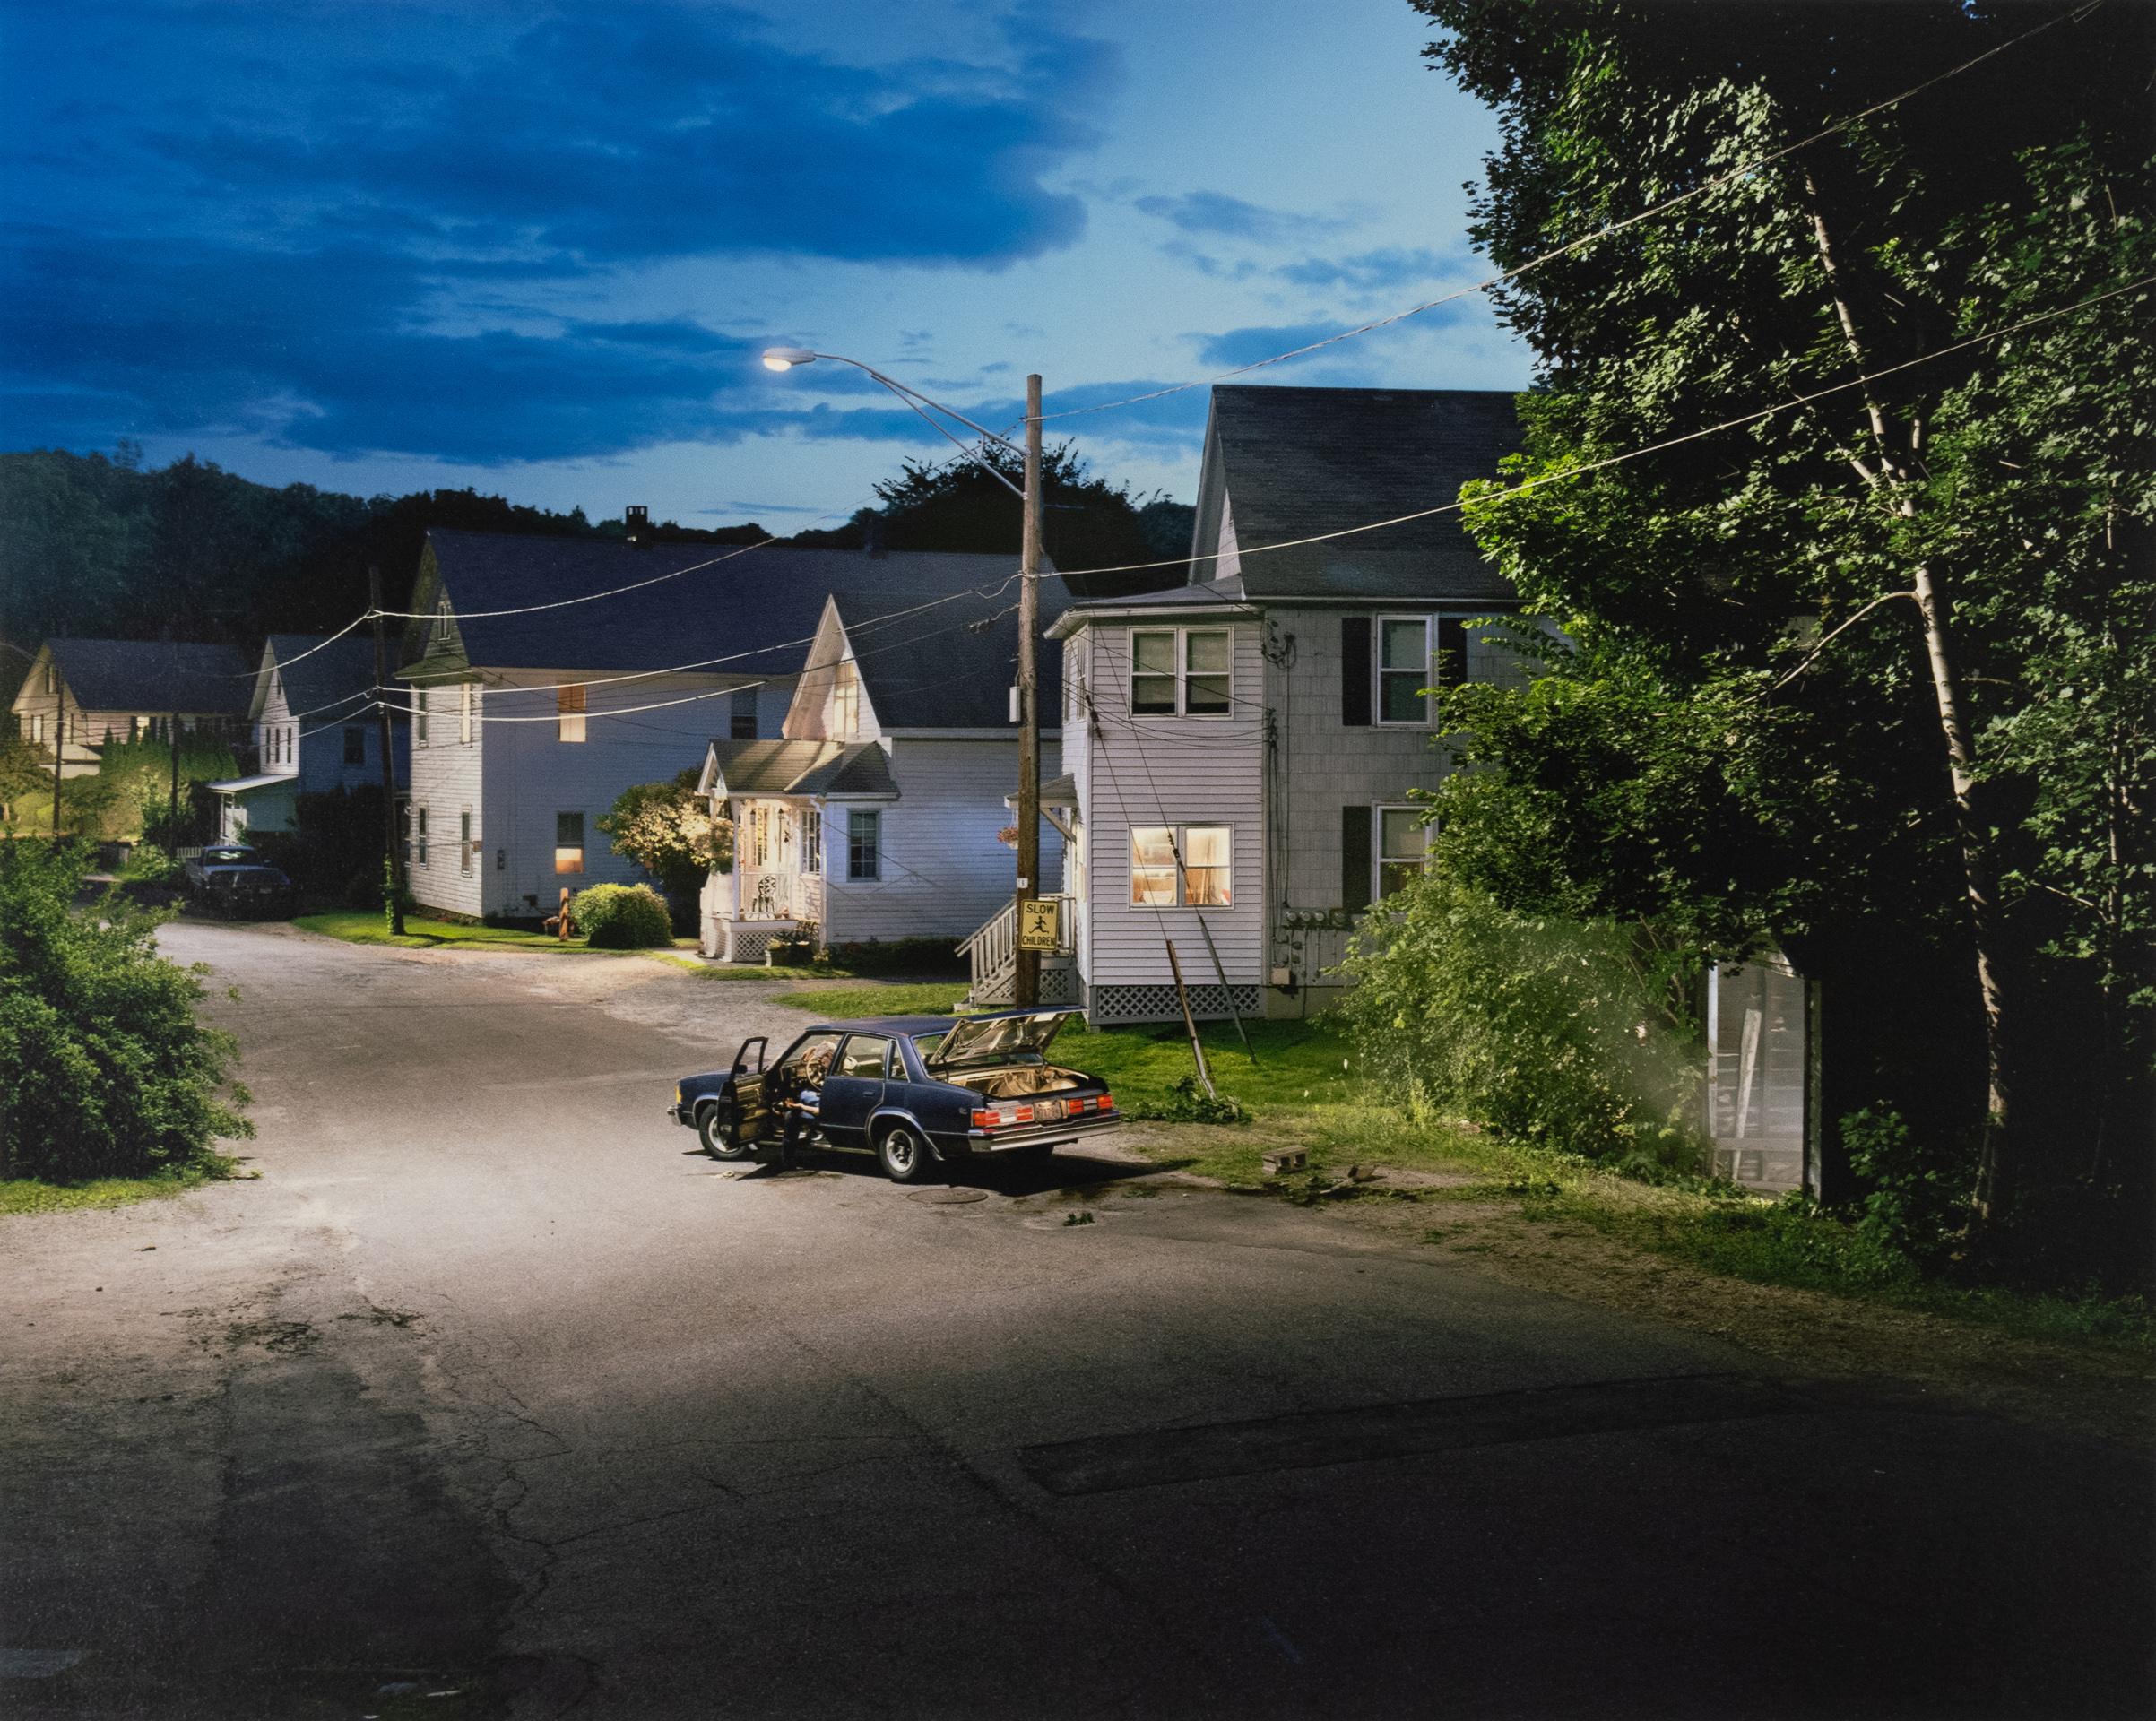 Untitled (Man in Car with Shed) - Photograph by Gregory Crewdson